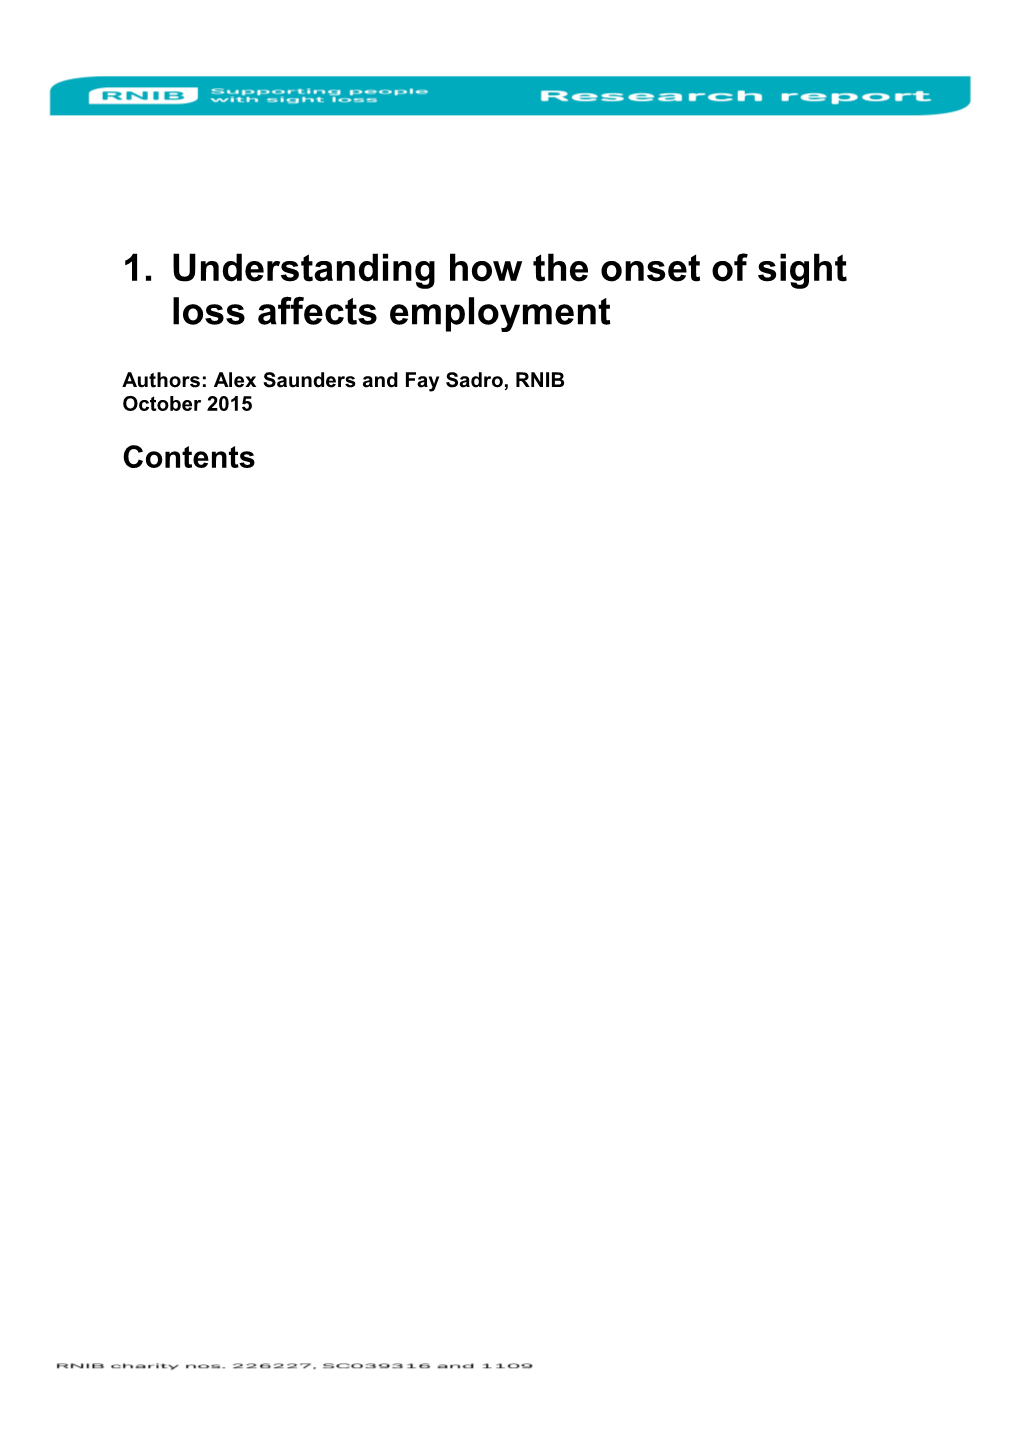 Understanding How the Onset of Sight Loss Affects Employment